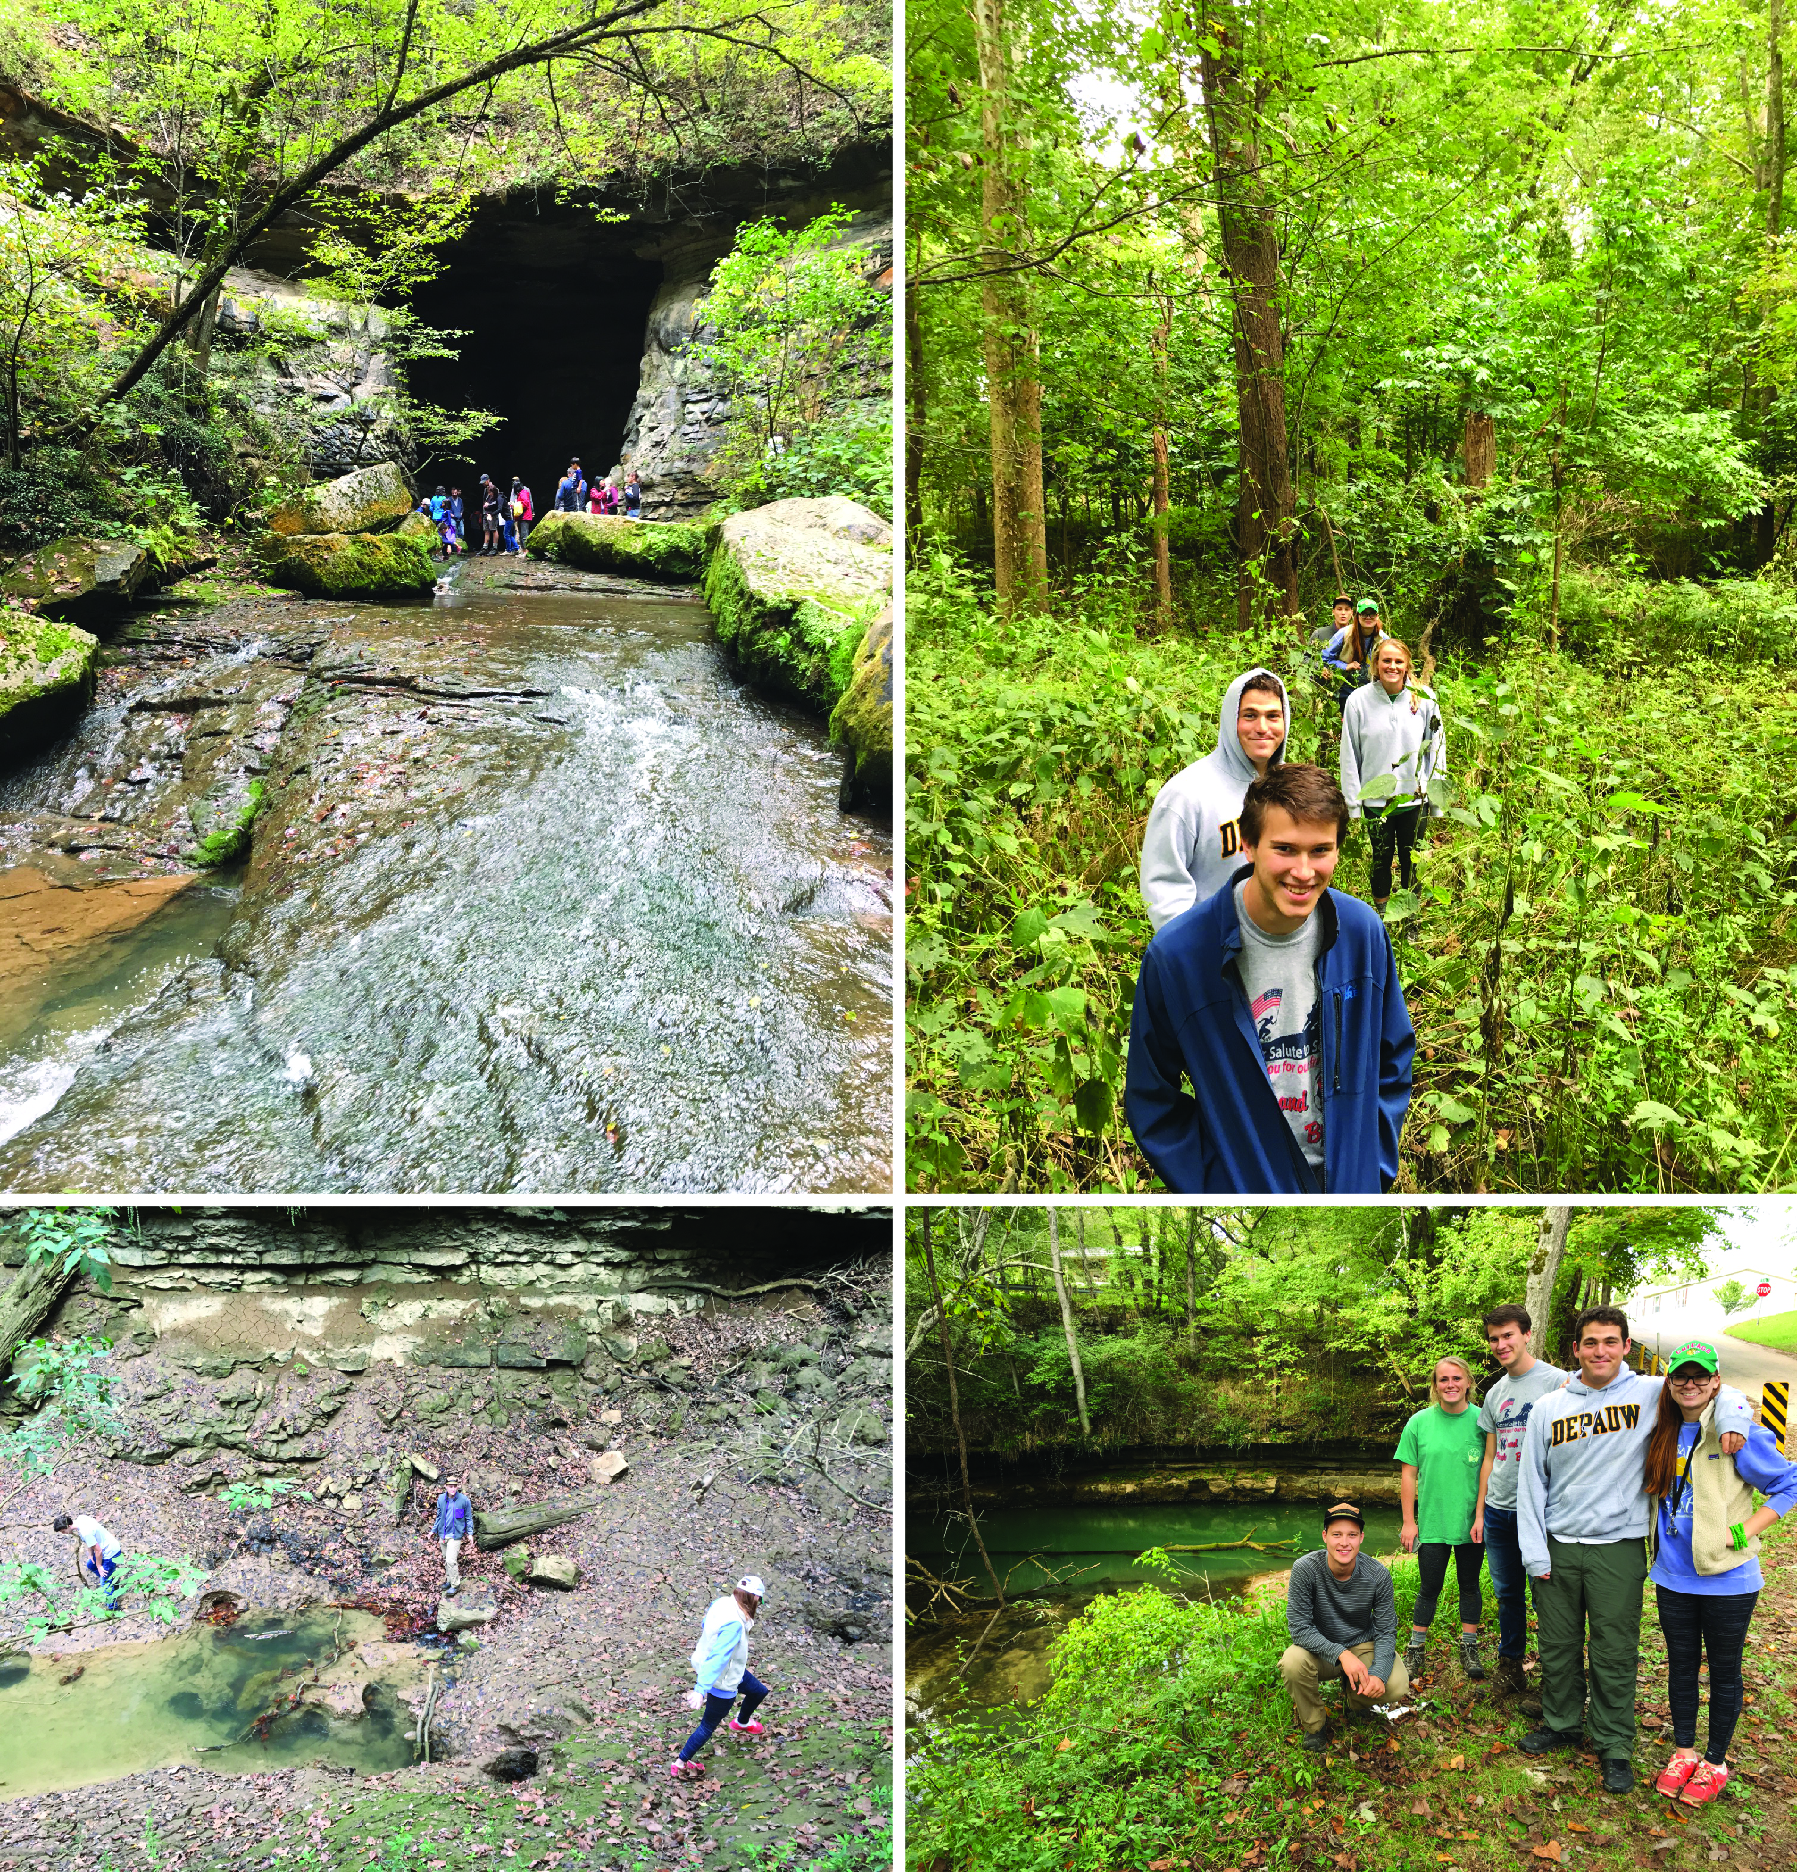 Collage of four photos from the Lost River Karst field trip